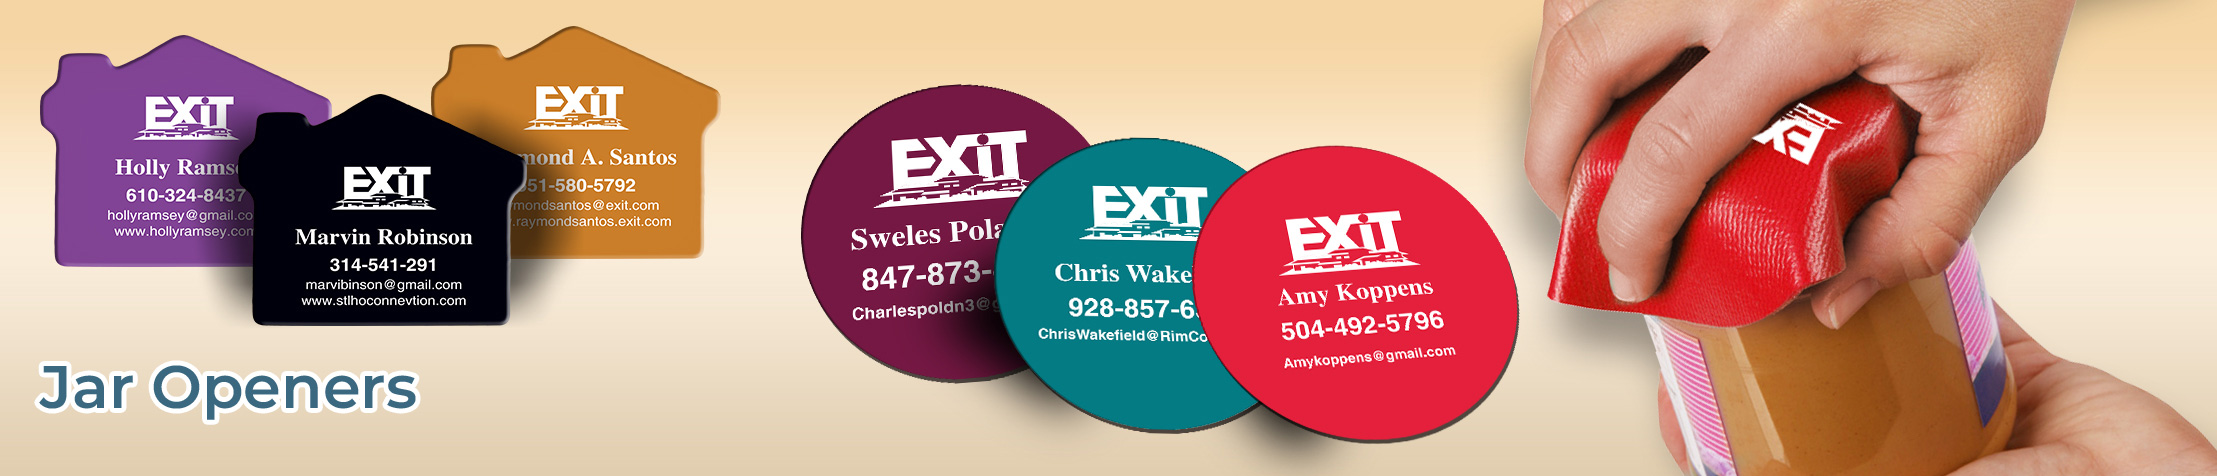 Exit Realty Real Estate Personalized Jar Opener - Promotional products: Jar Openers | BestPrintBuy.com